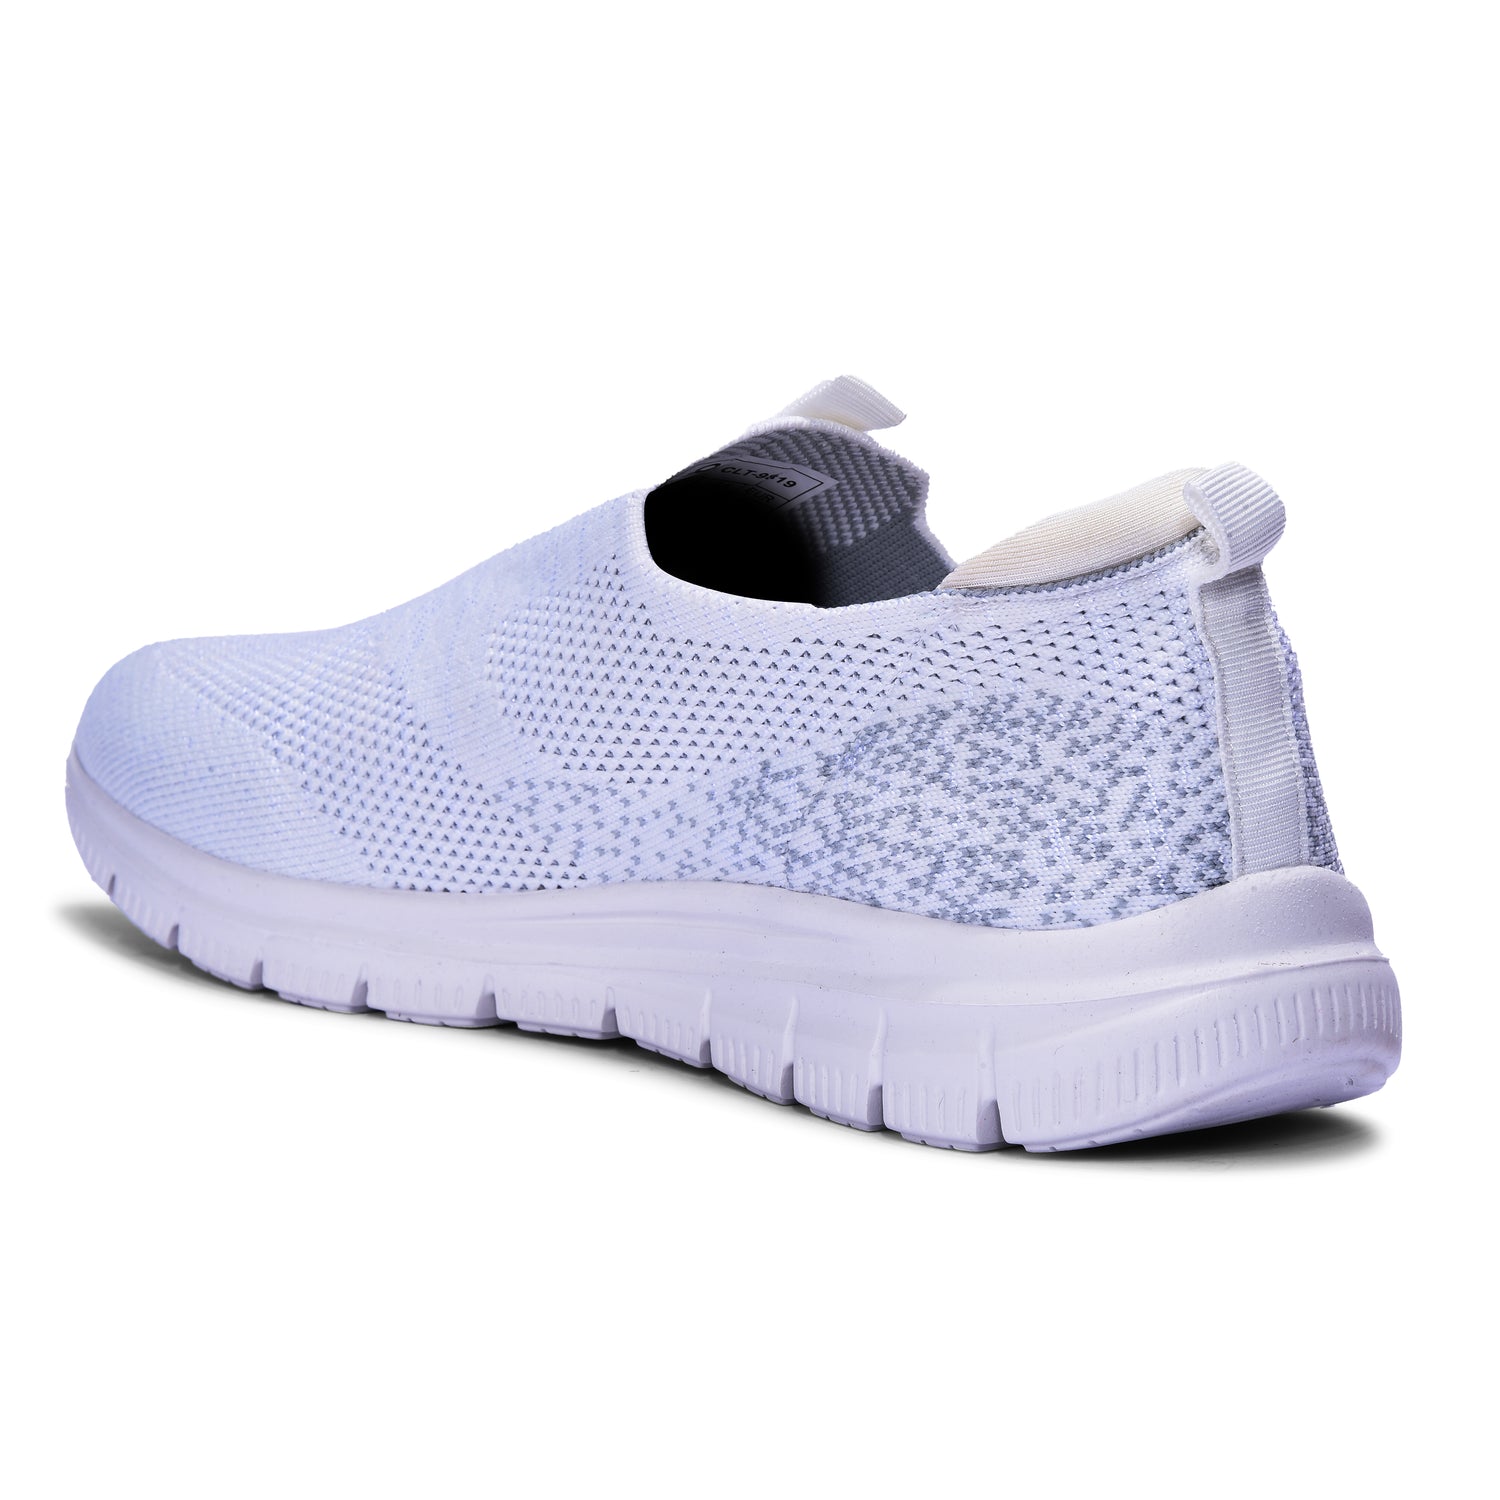 Calcetto CLT-9819 Full White Casual Shoe For Women